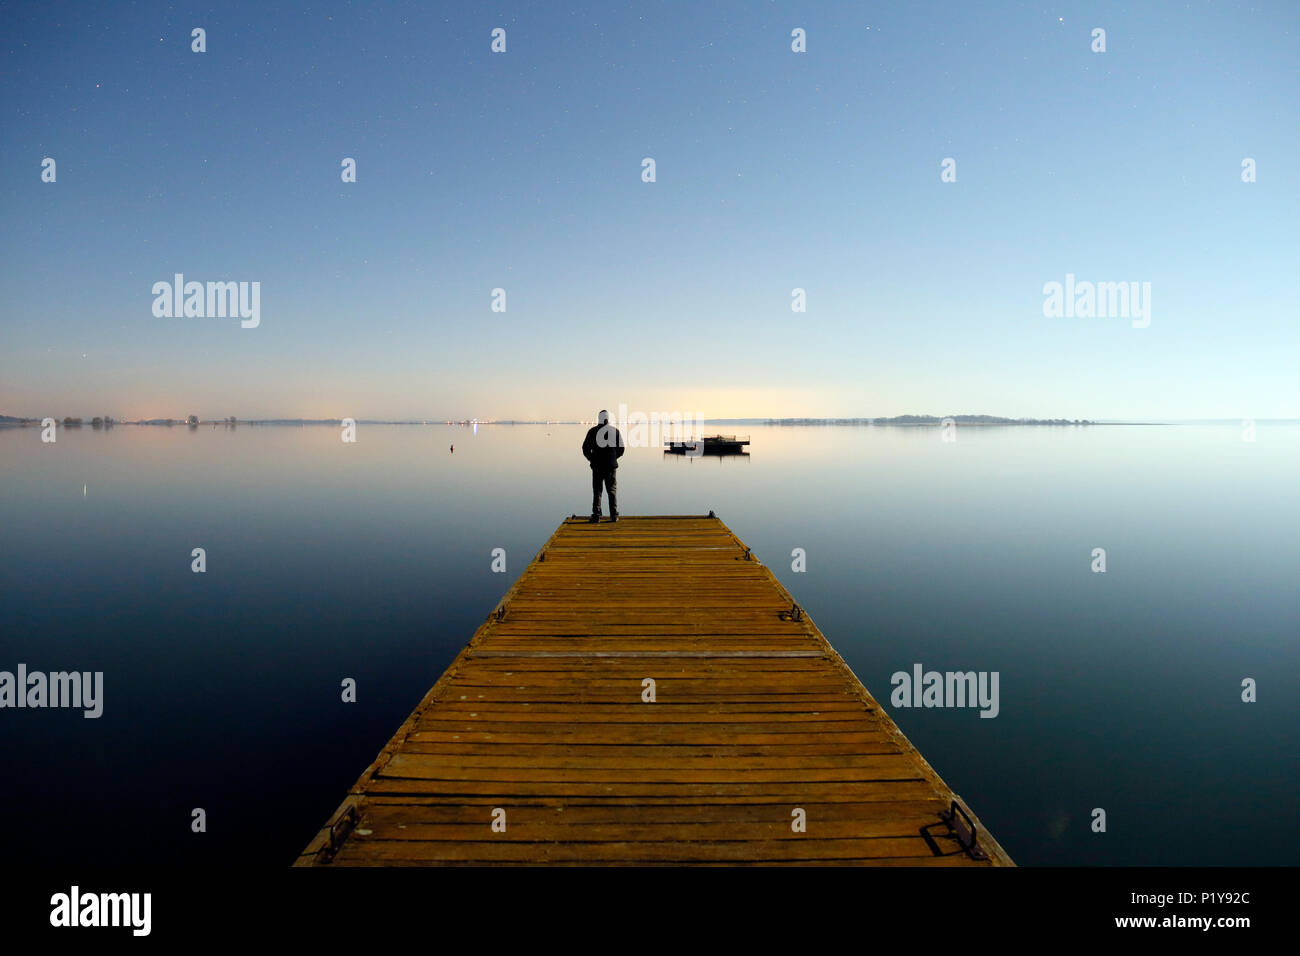 The Marne. Haute-Marne. Lake of DER in winter. Site of Chantecoq of night. Pontoon on the lake. Man admiring the lake. Stock Photo